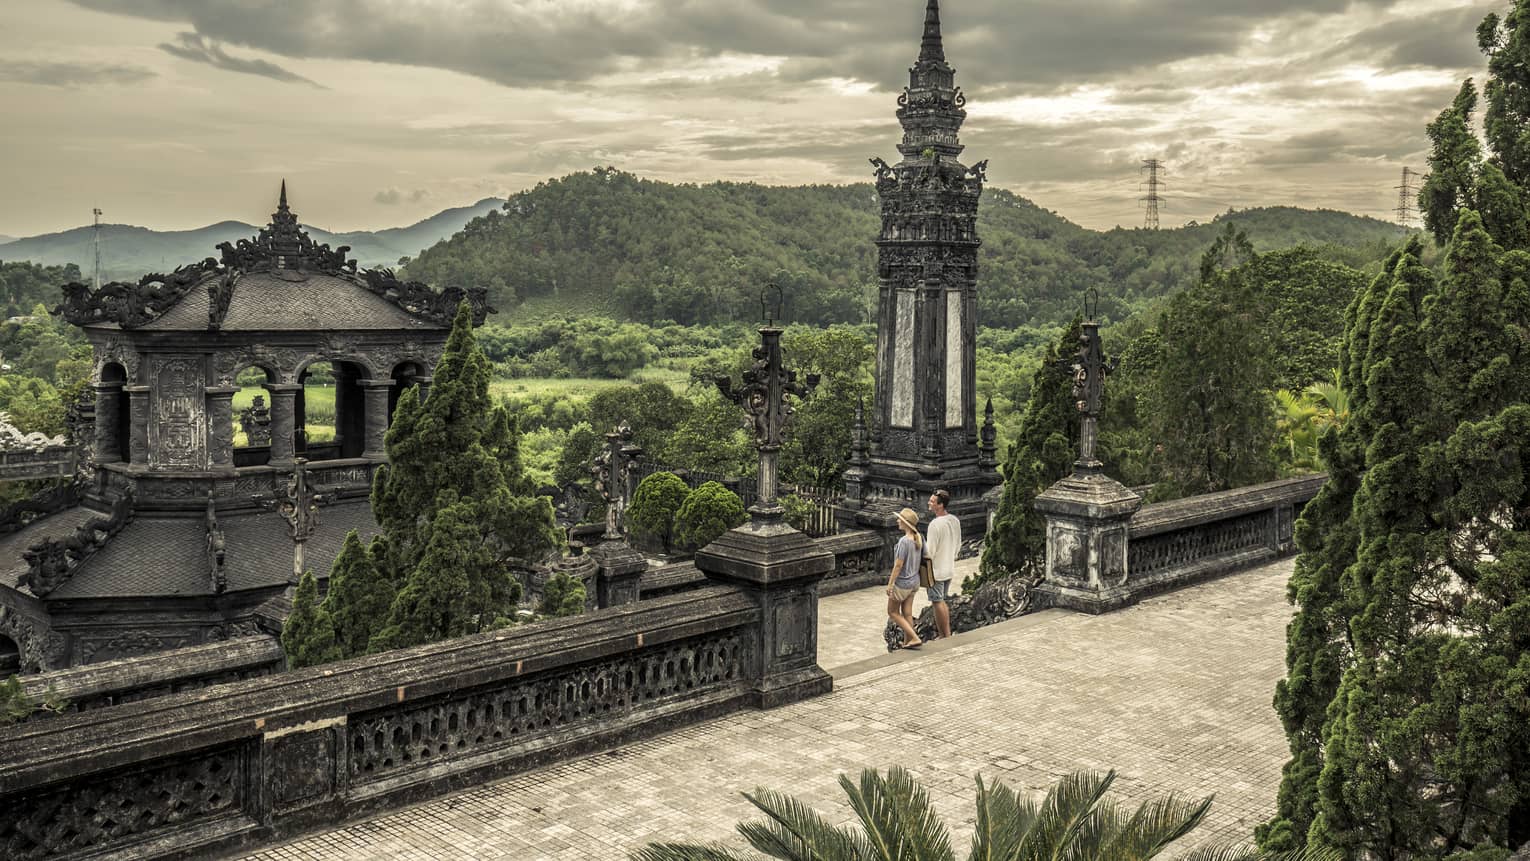 Man and woman walk down steps of historic Imperial City of Hue with stone towers, rolling hills